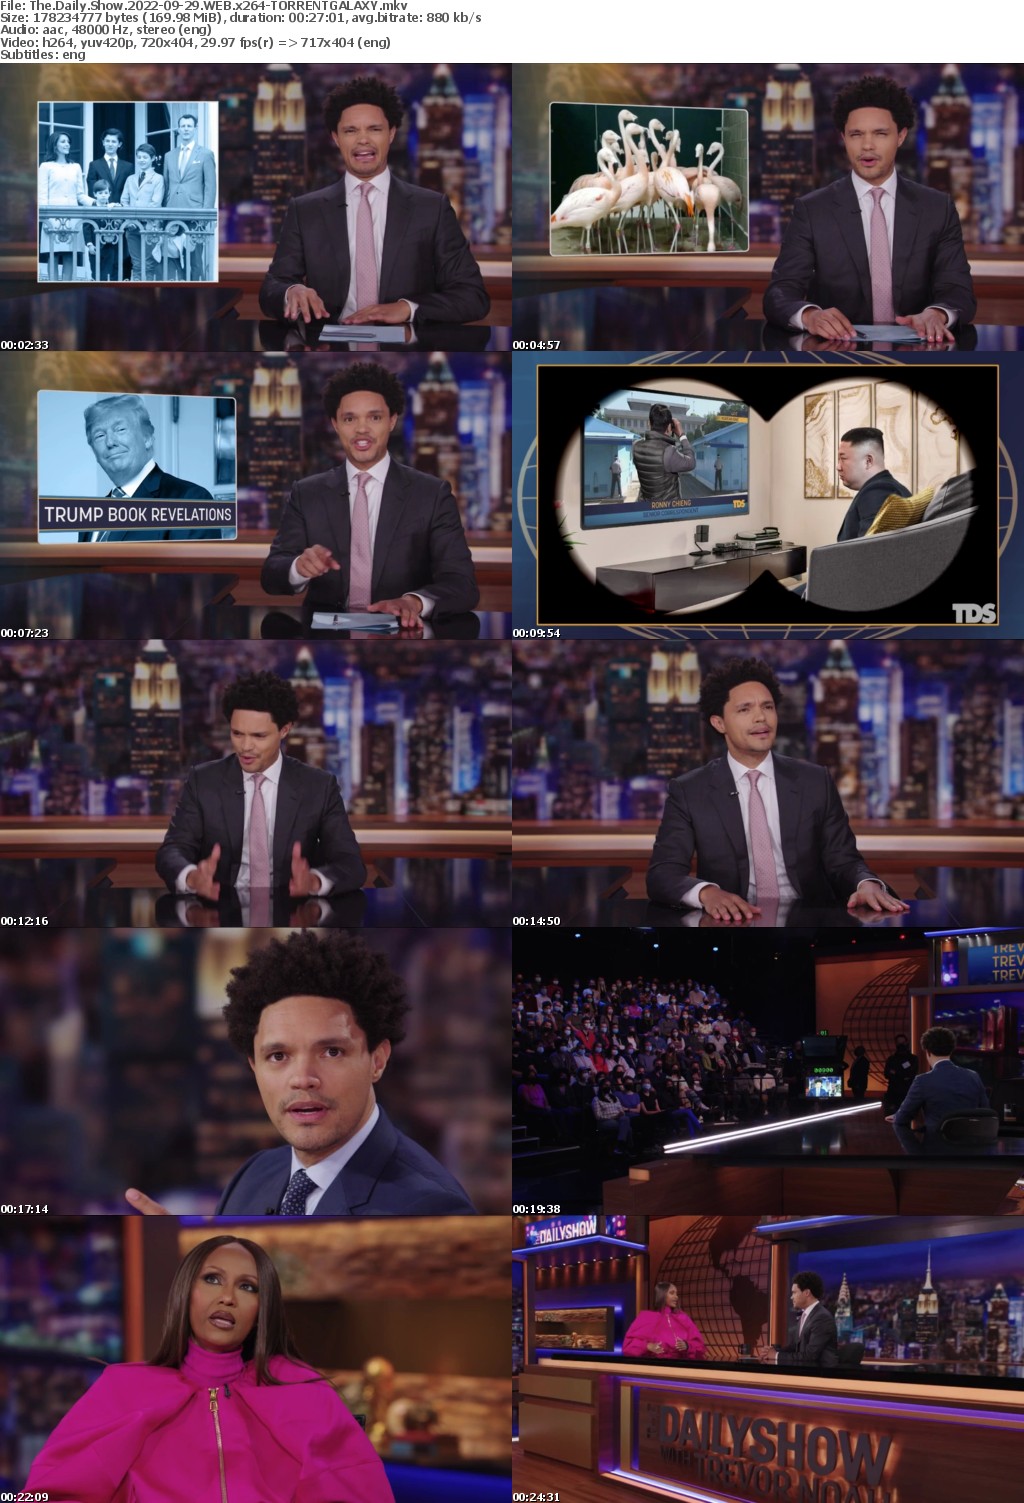 The Daily Show 2022-09-29 WEB x264-GALAXY